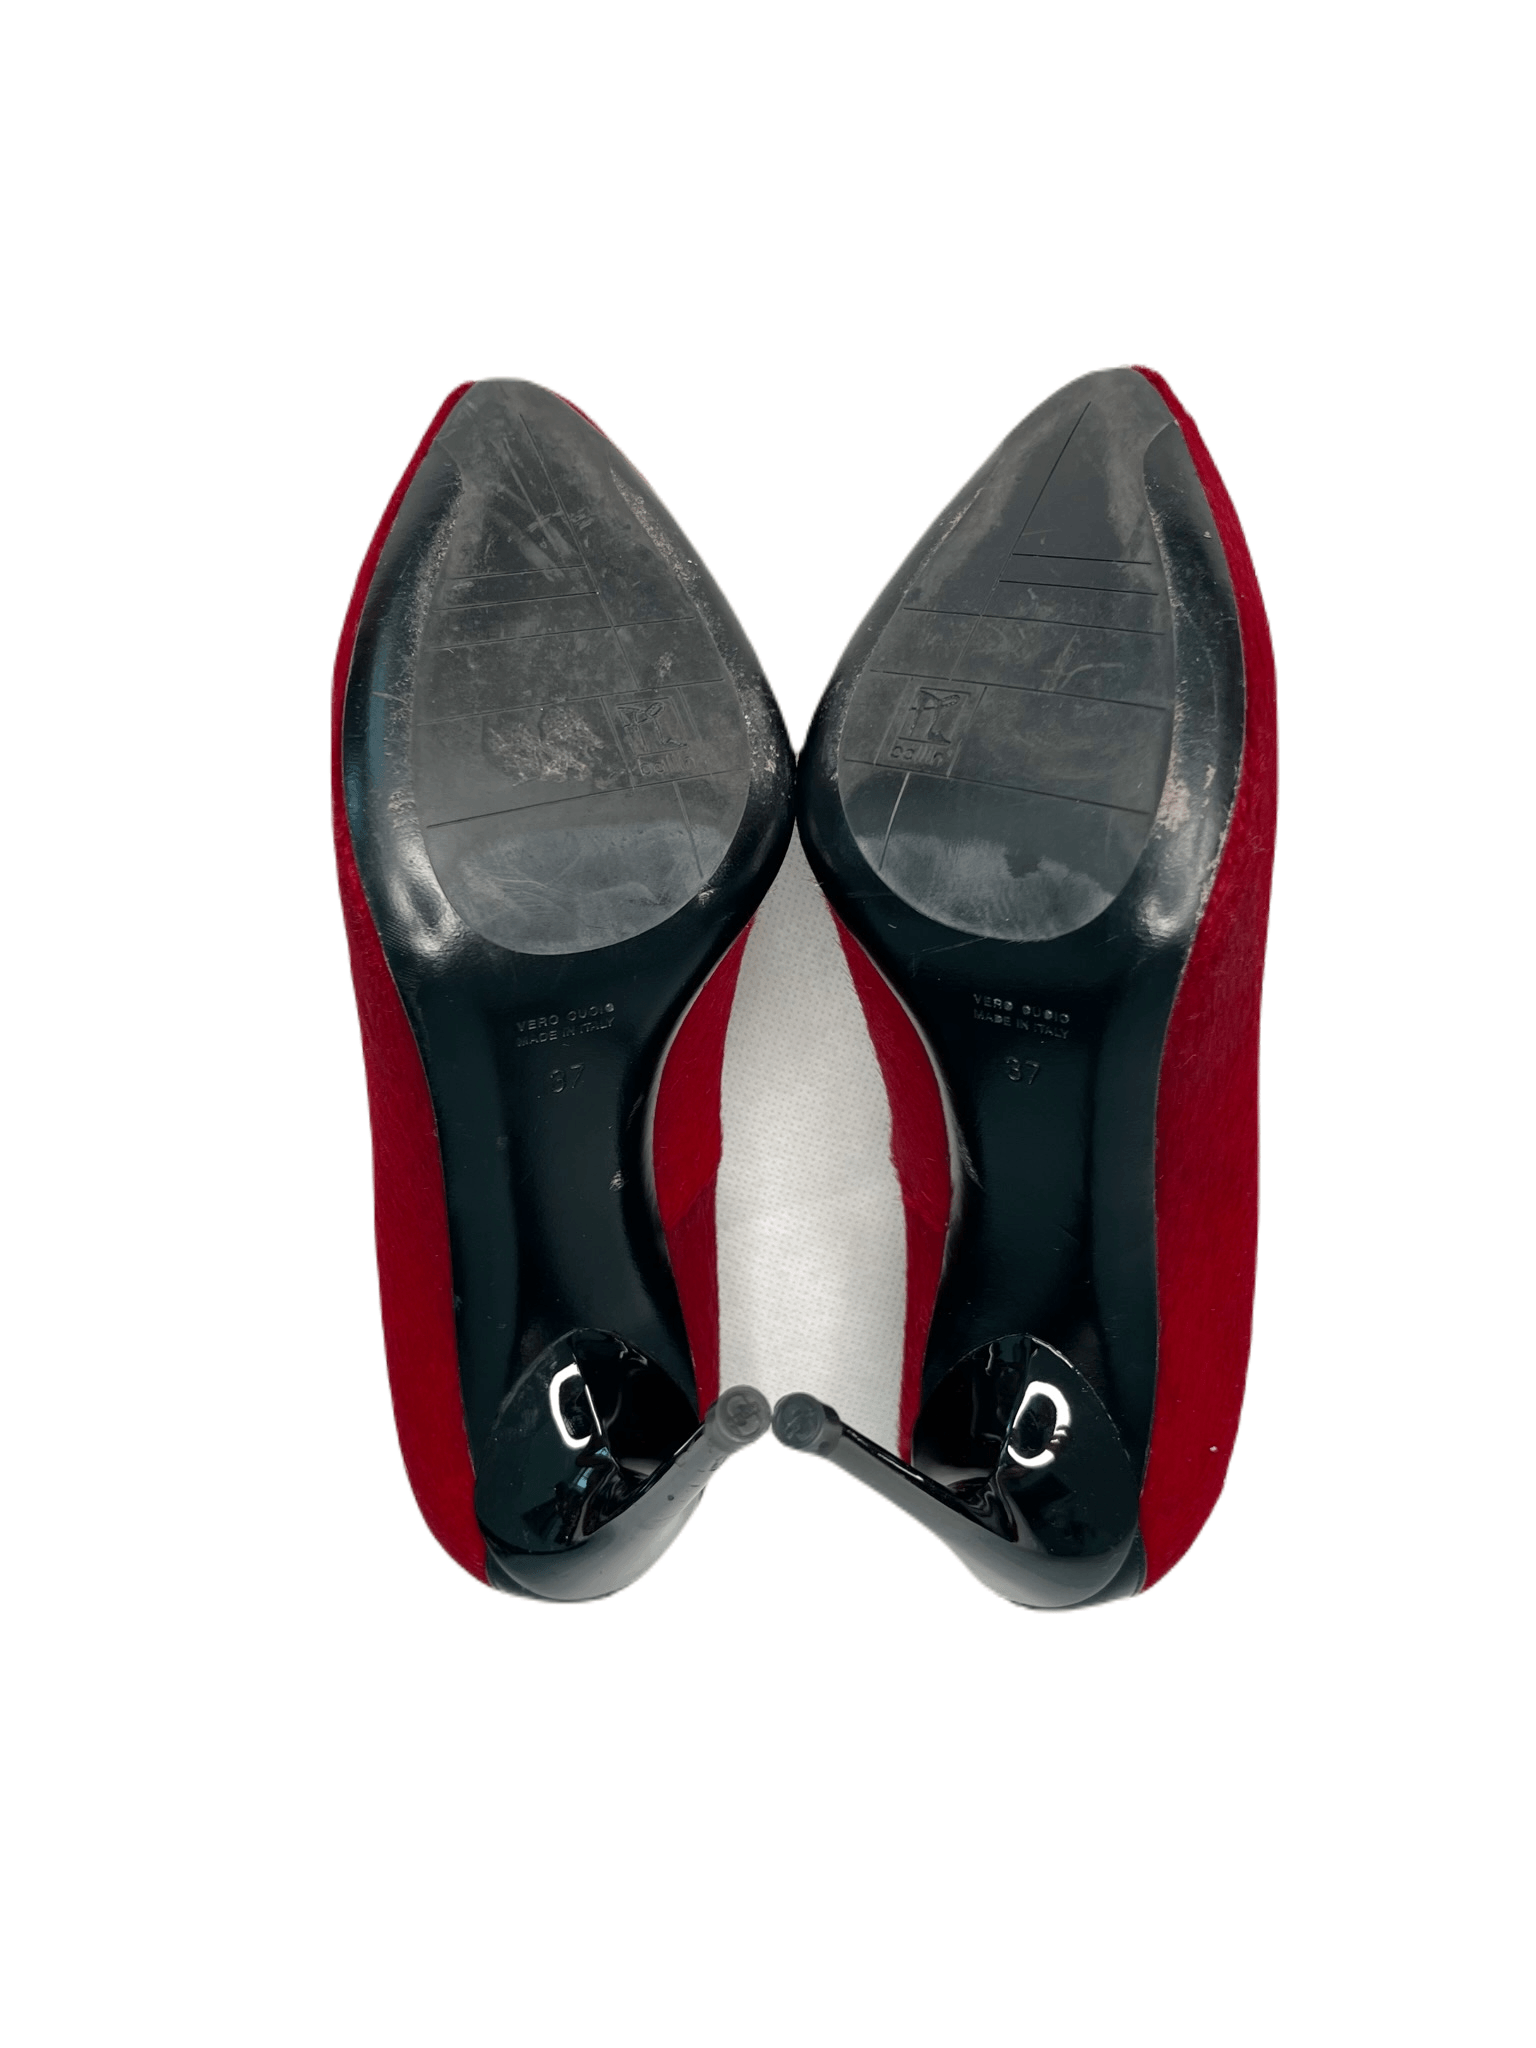 Heeled Pumps in Red - Endless